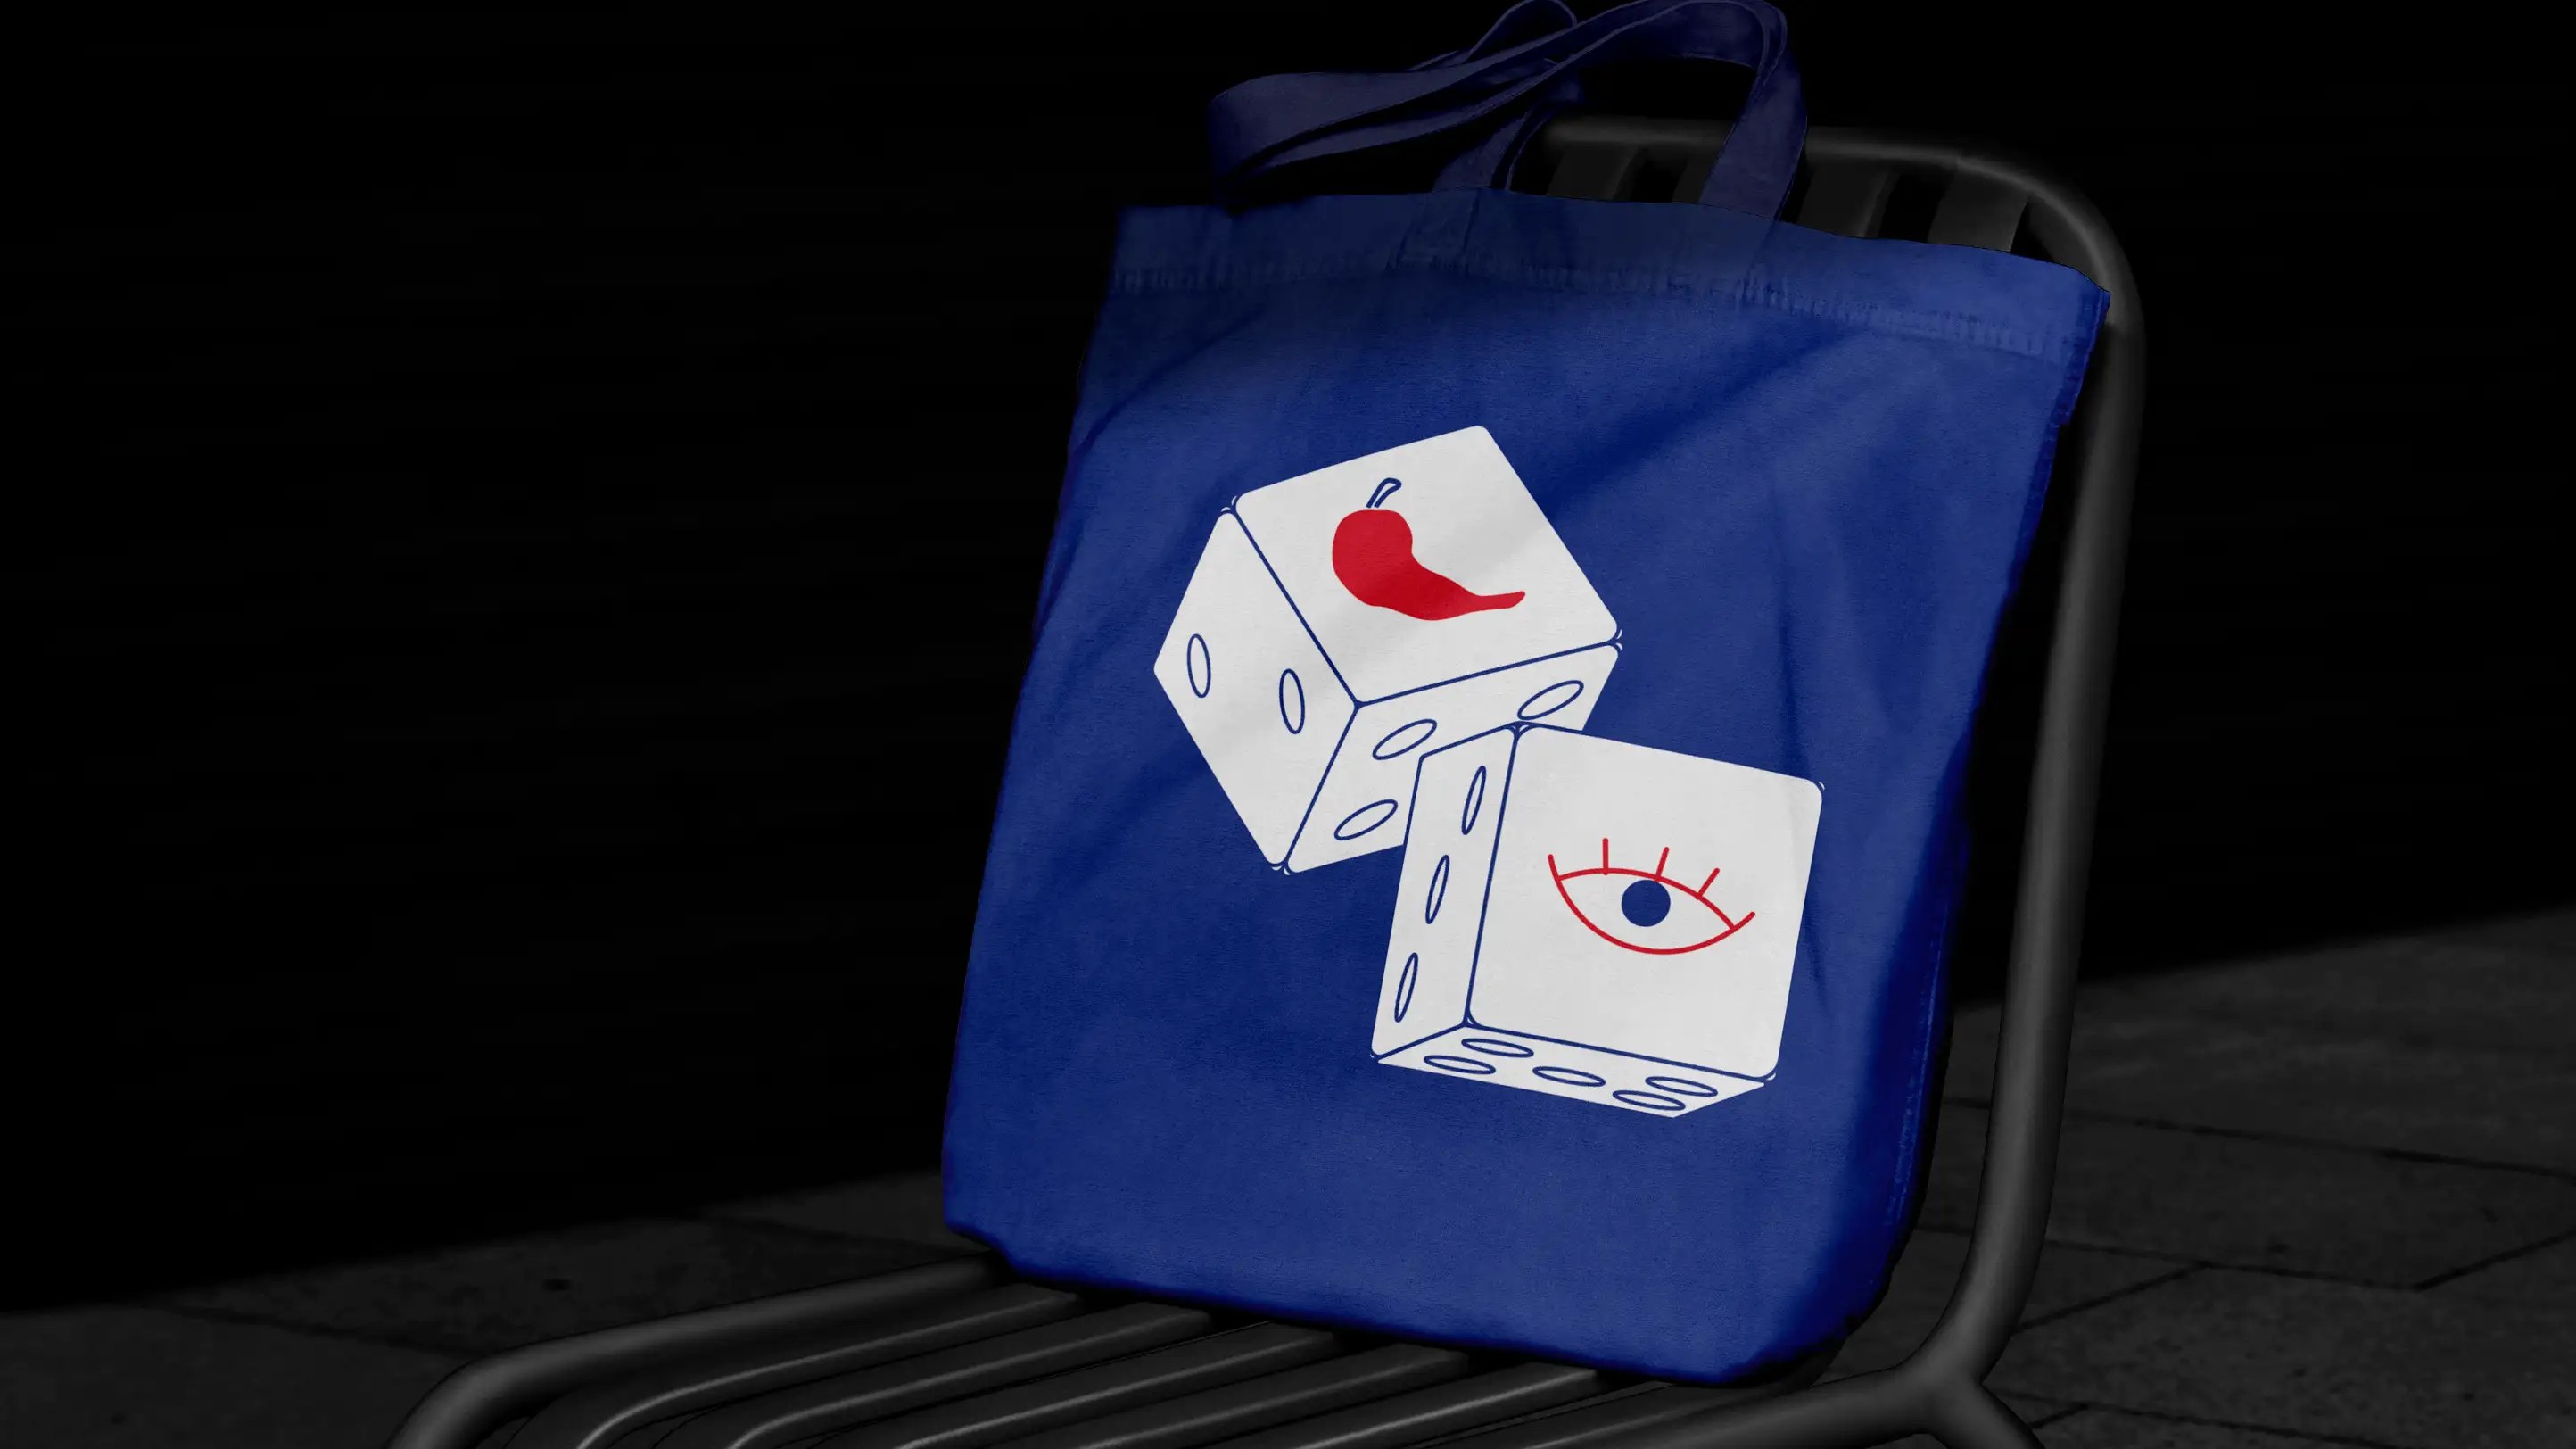 Blue tote bag design featuring Spicy Eyes dice icon.